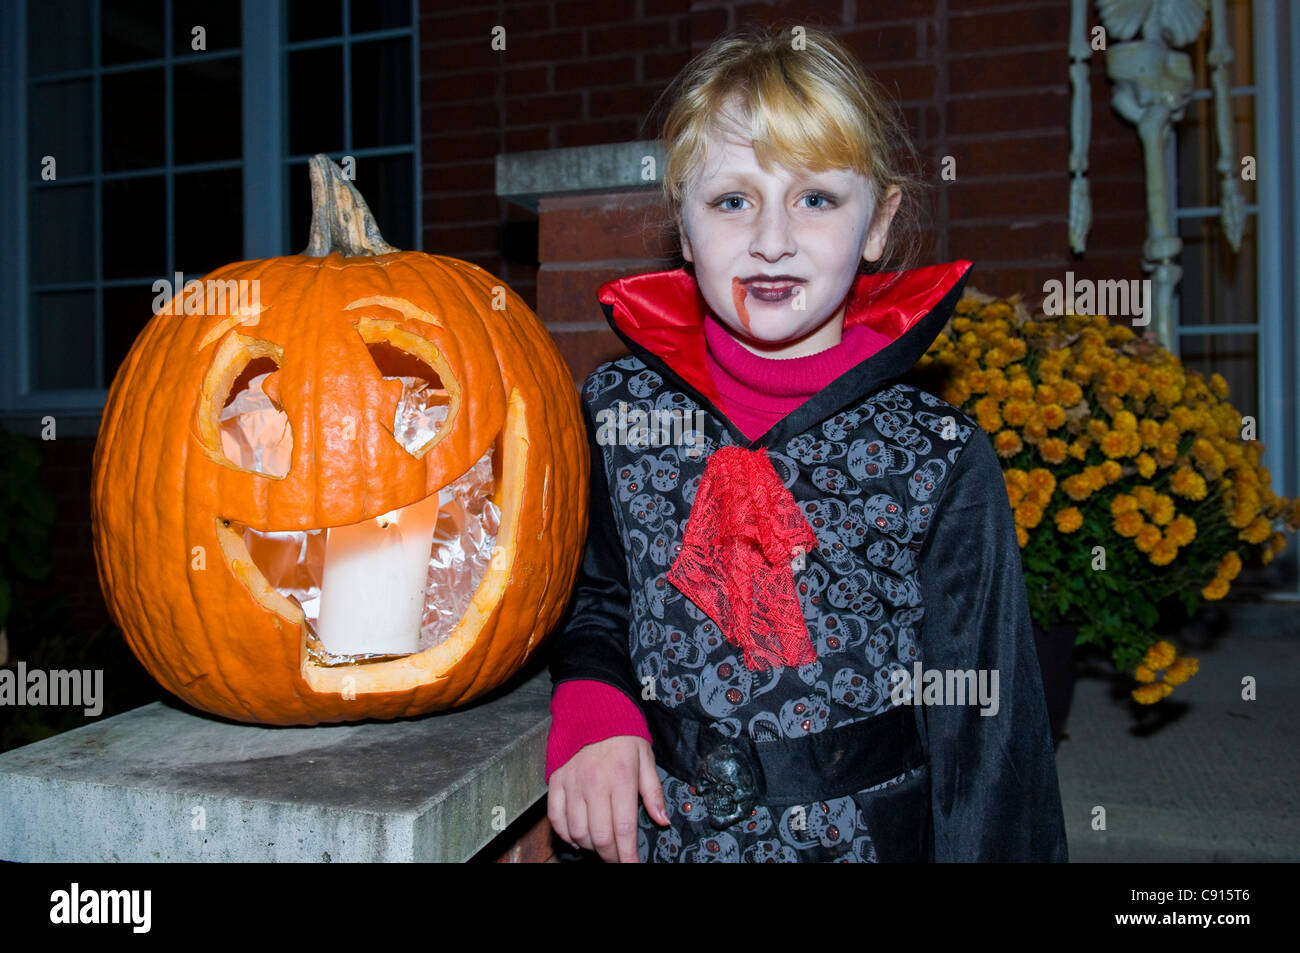 Girl in costume during Halloween Stock Photo